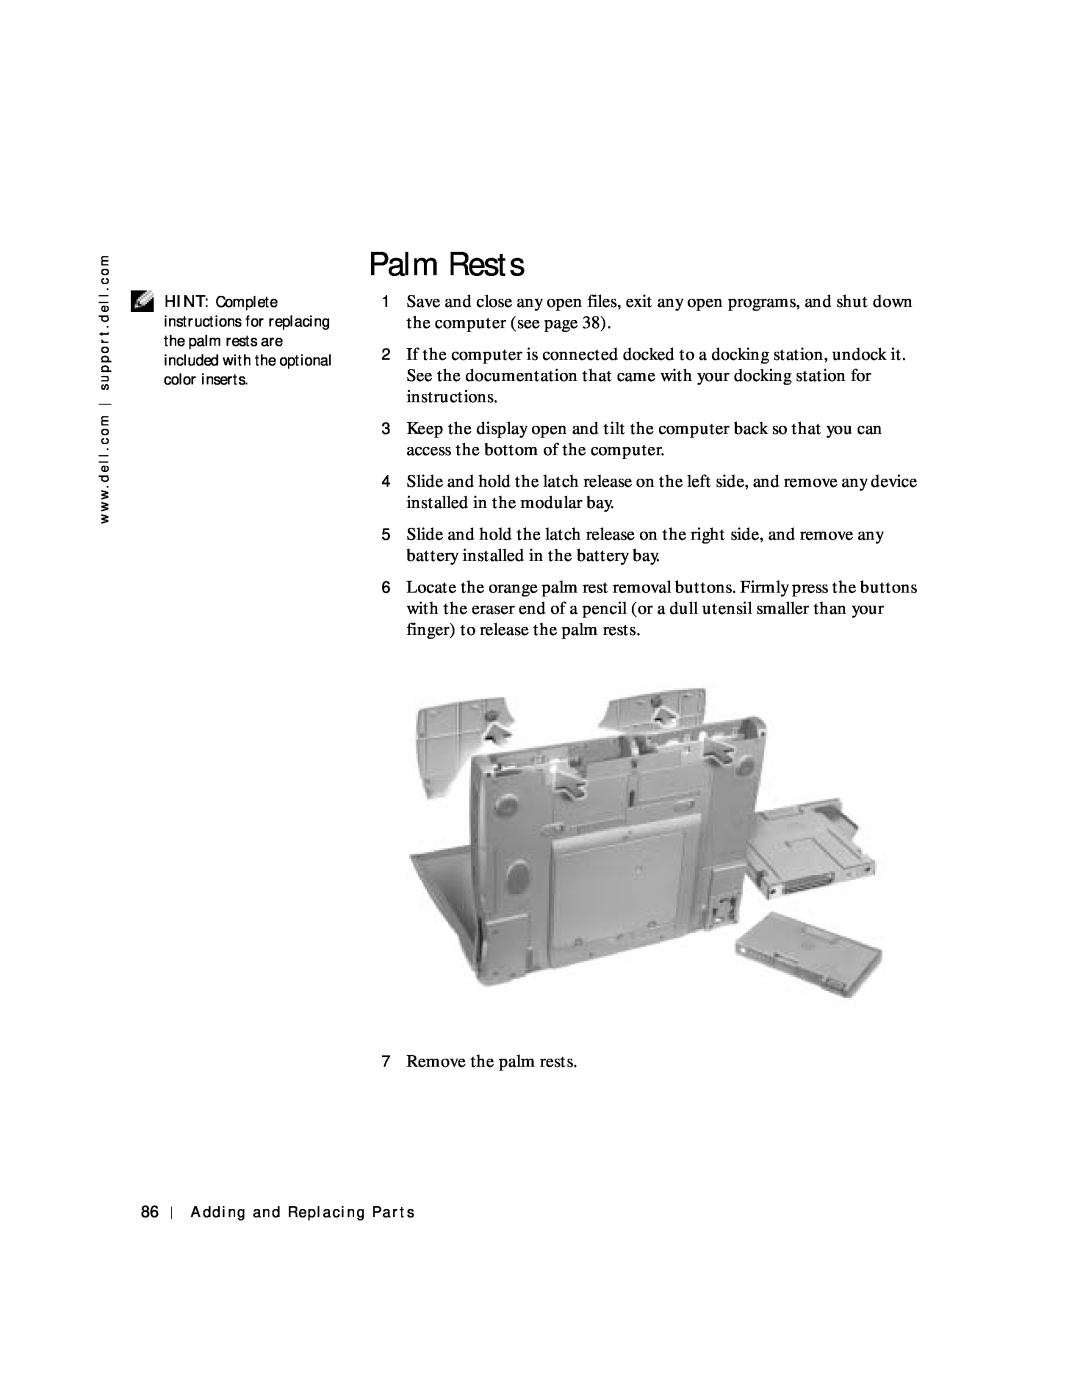 Dell 4150 owner manual Palm Rests, Adding and Replacing Parts 